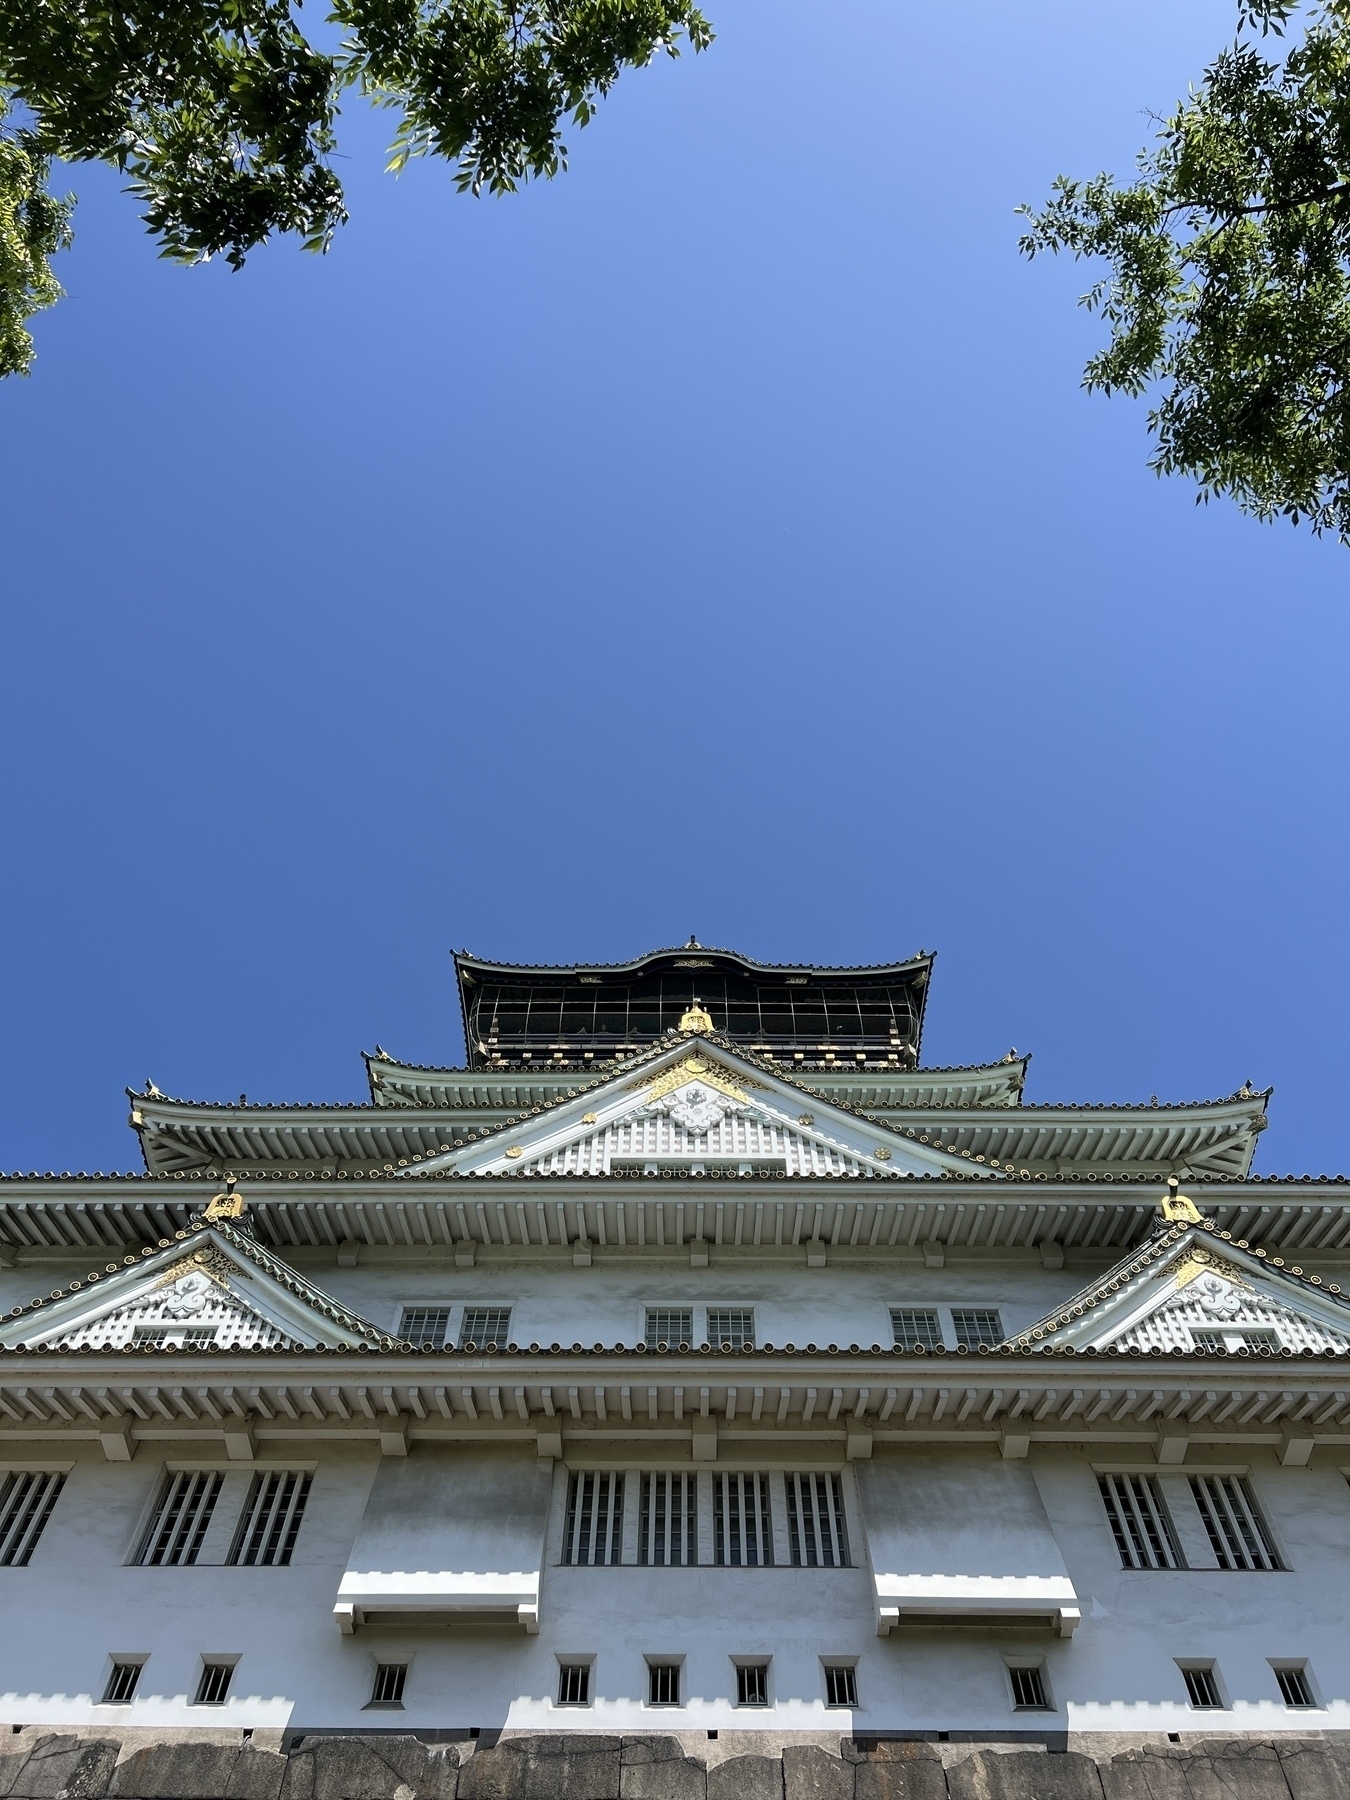 Looking up at Osaka castle, the brass fittings glitter in the sunlight